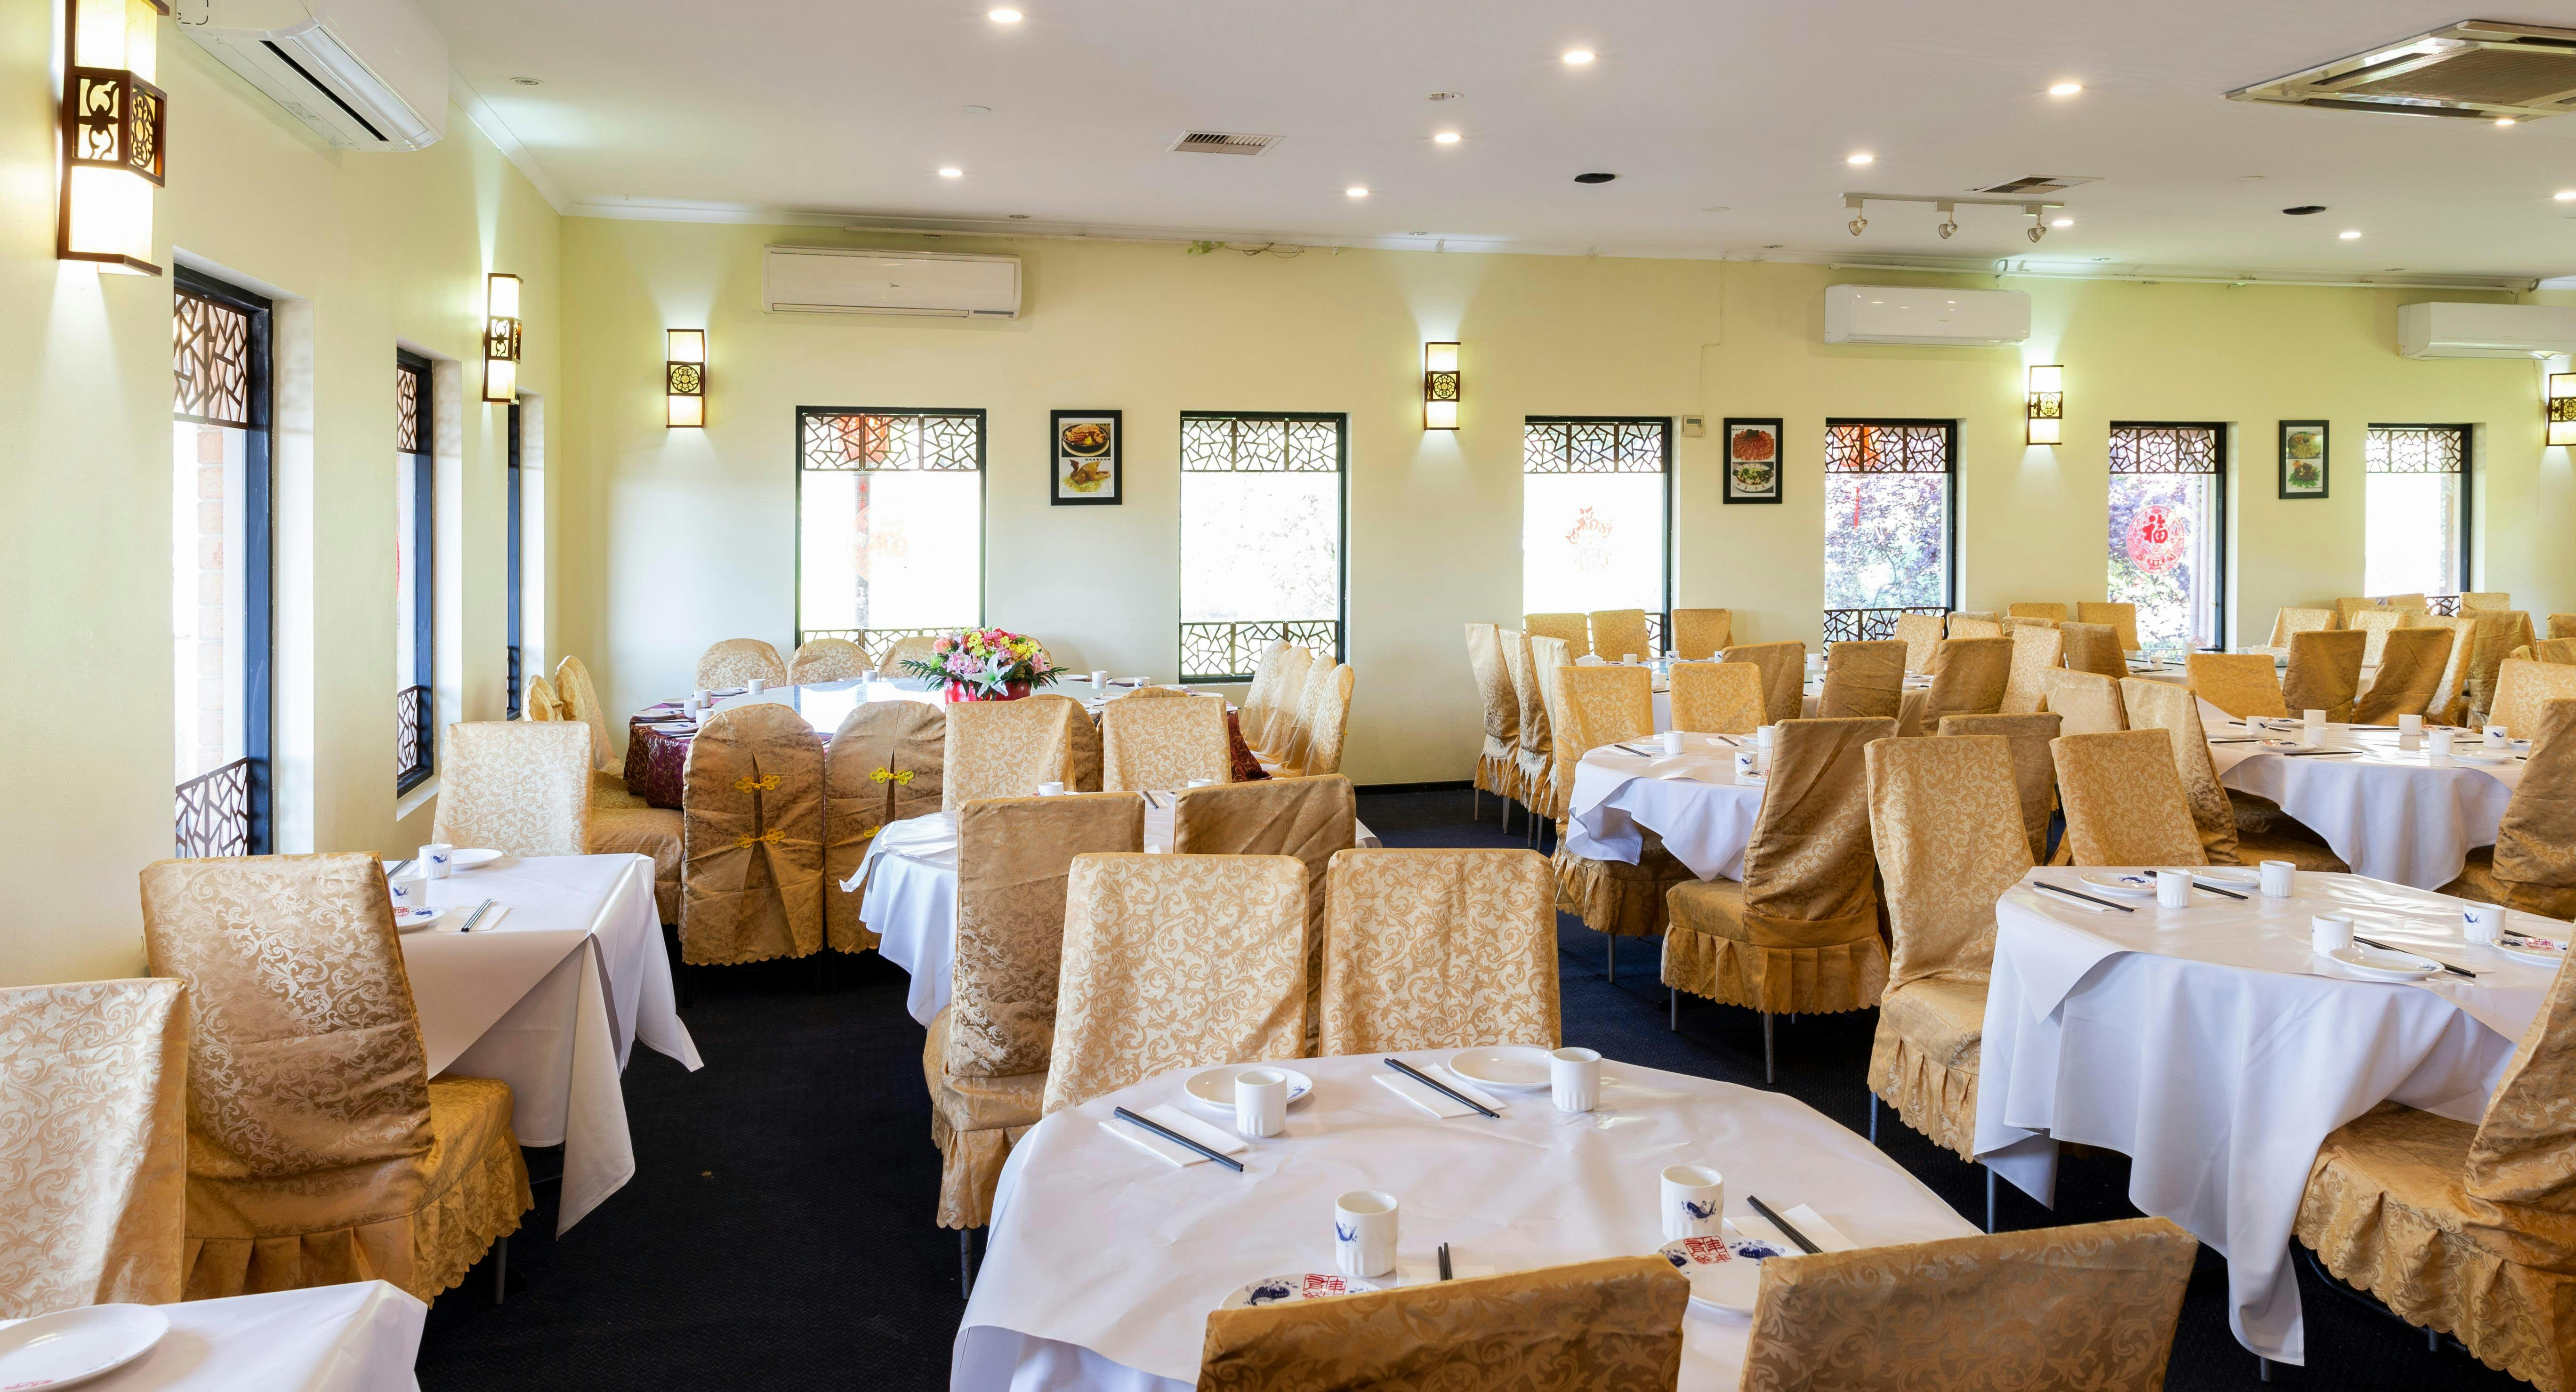 Photo of restaurant Chrysanthemum House in Doncaster East, Melbourne